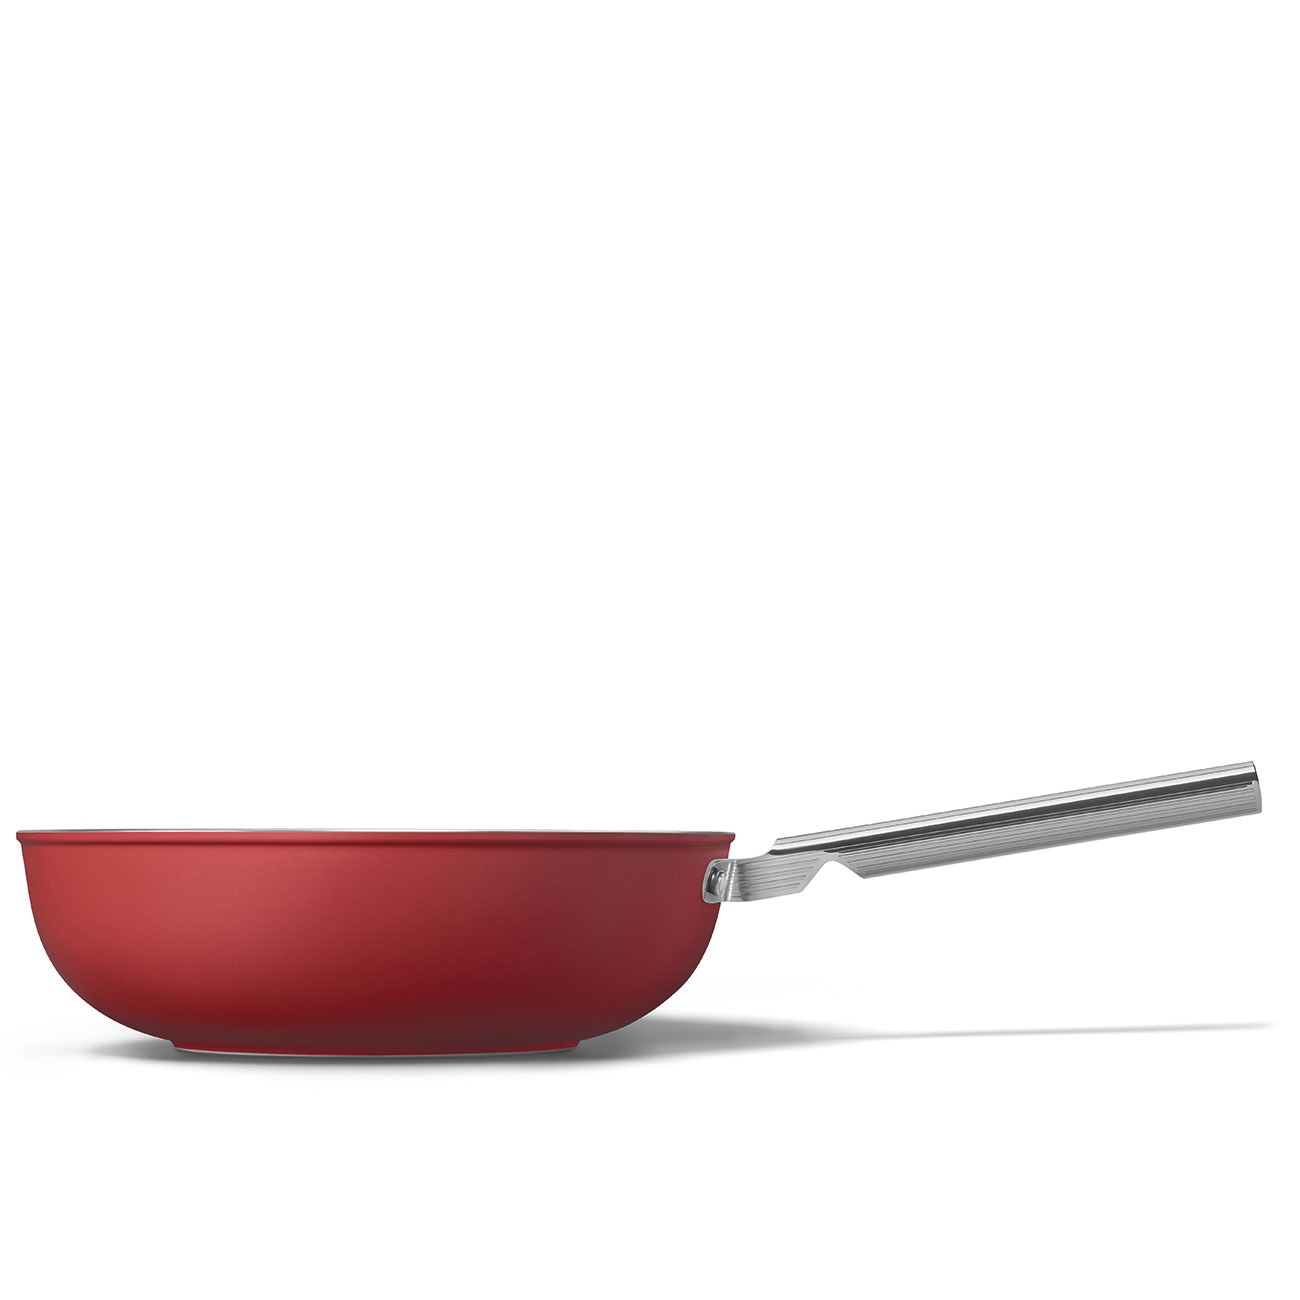 Smeg Red Non-stick Wok with Stainless Steel Handle - CKFW3001RDM_1